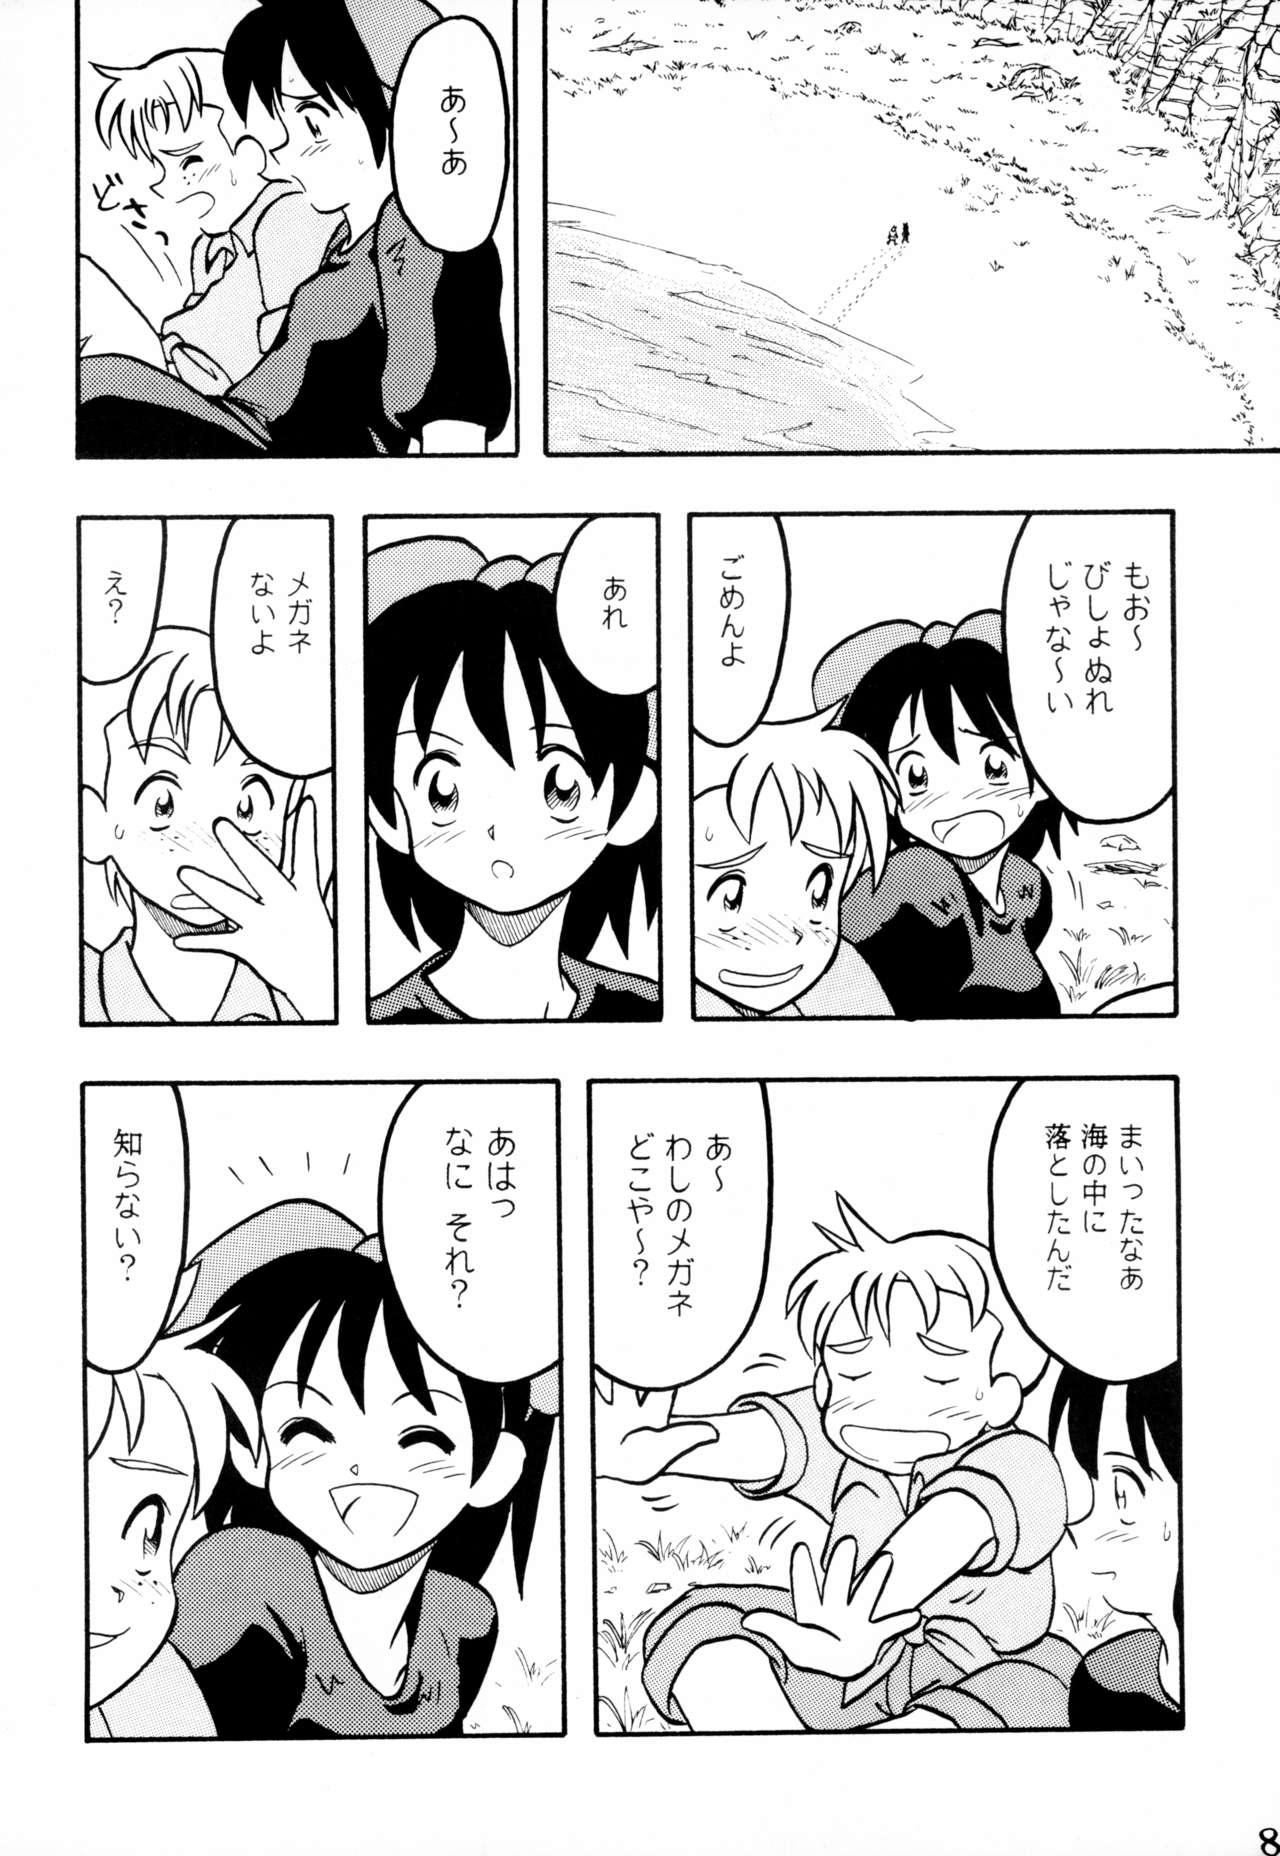 Porn STRANDED - Kikis delivery service | majo no takkyuubin Pussy Play - Page 8